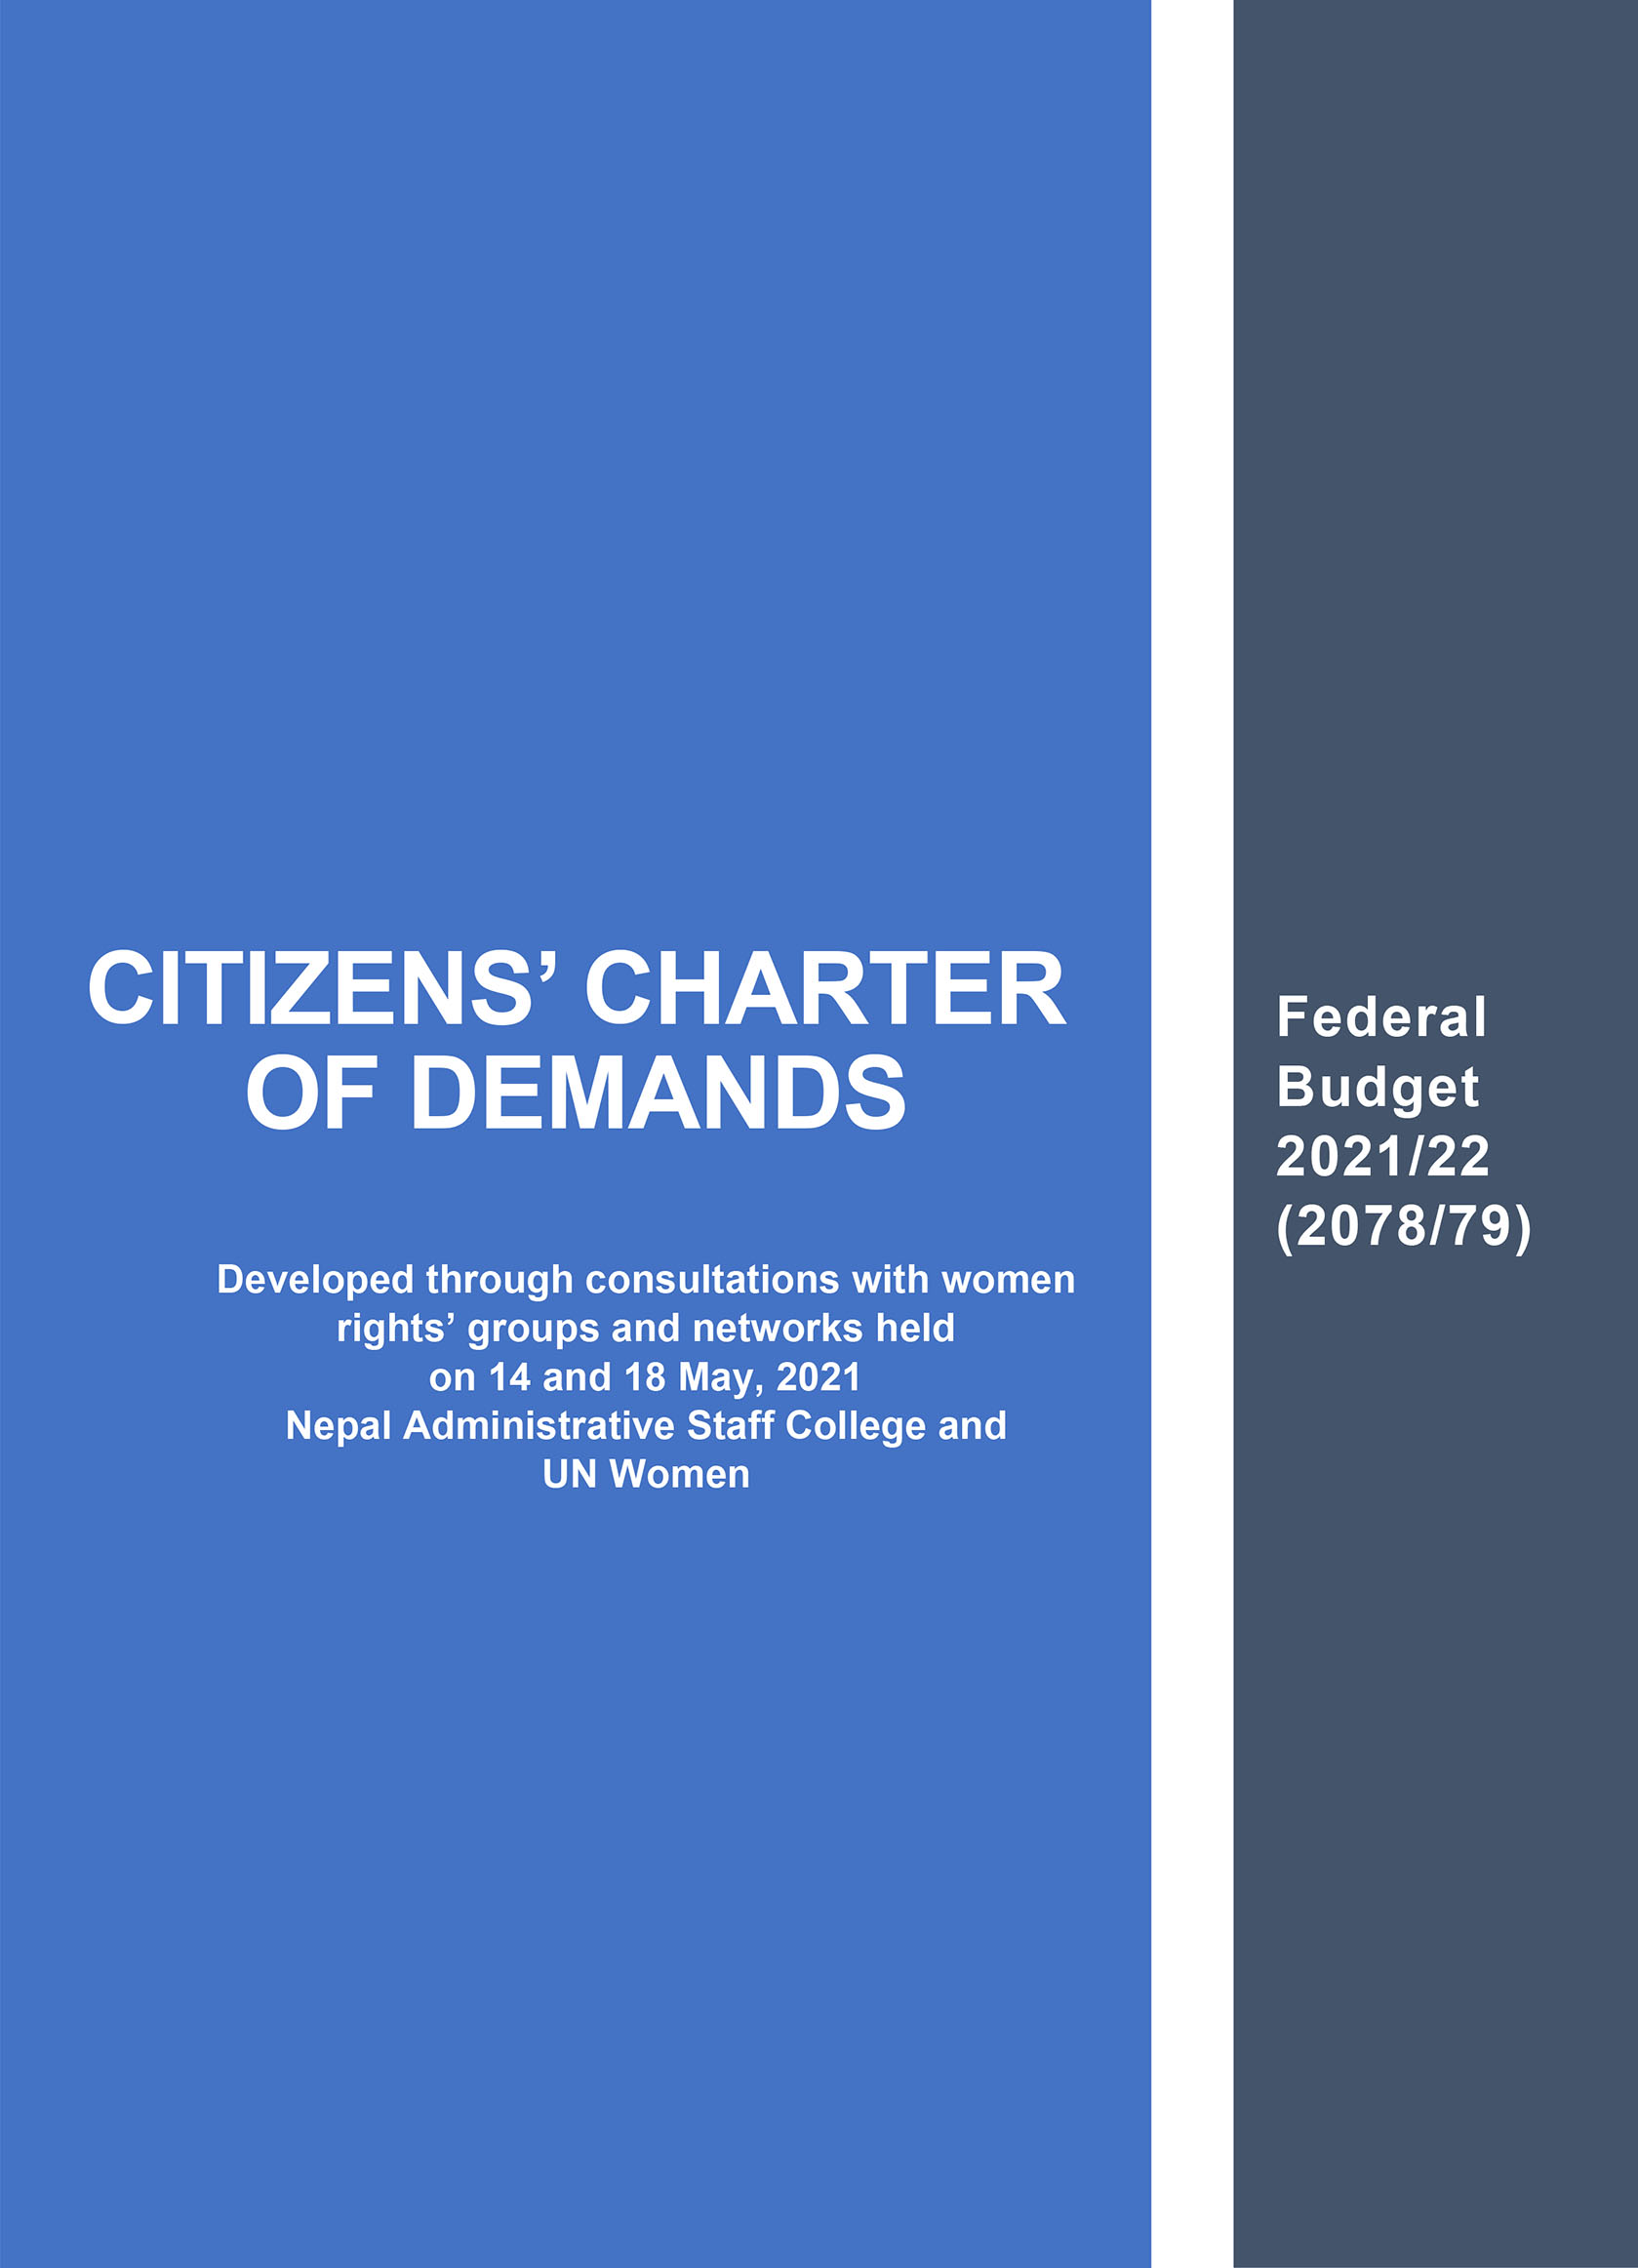 Charter of Demands and Gender and Social Inclusion Priorities in Budget